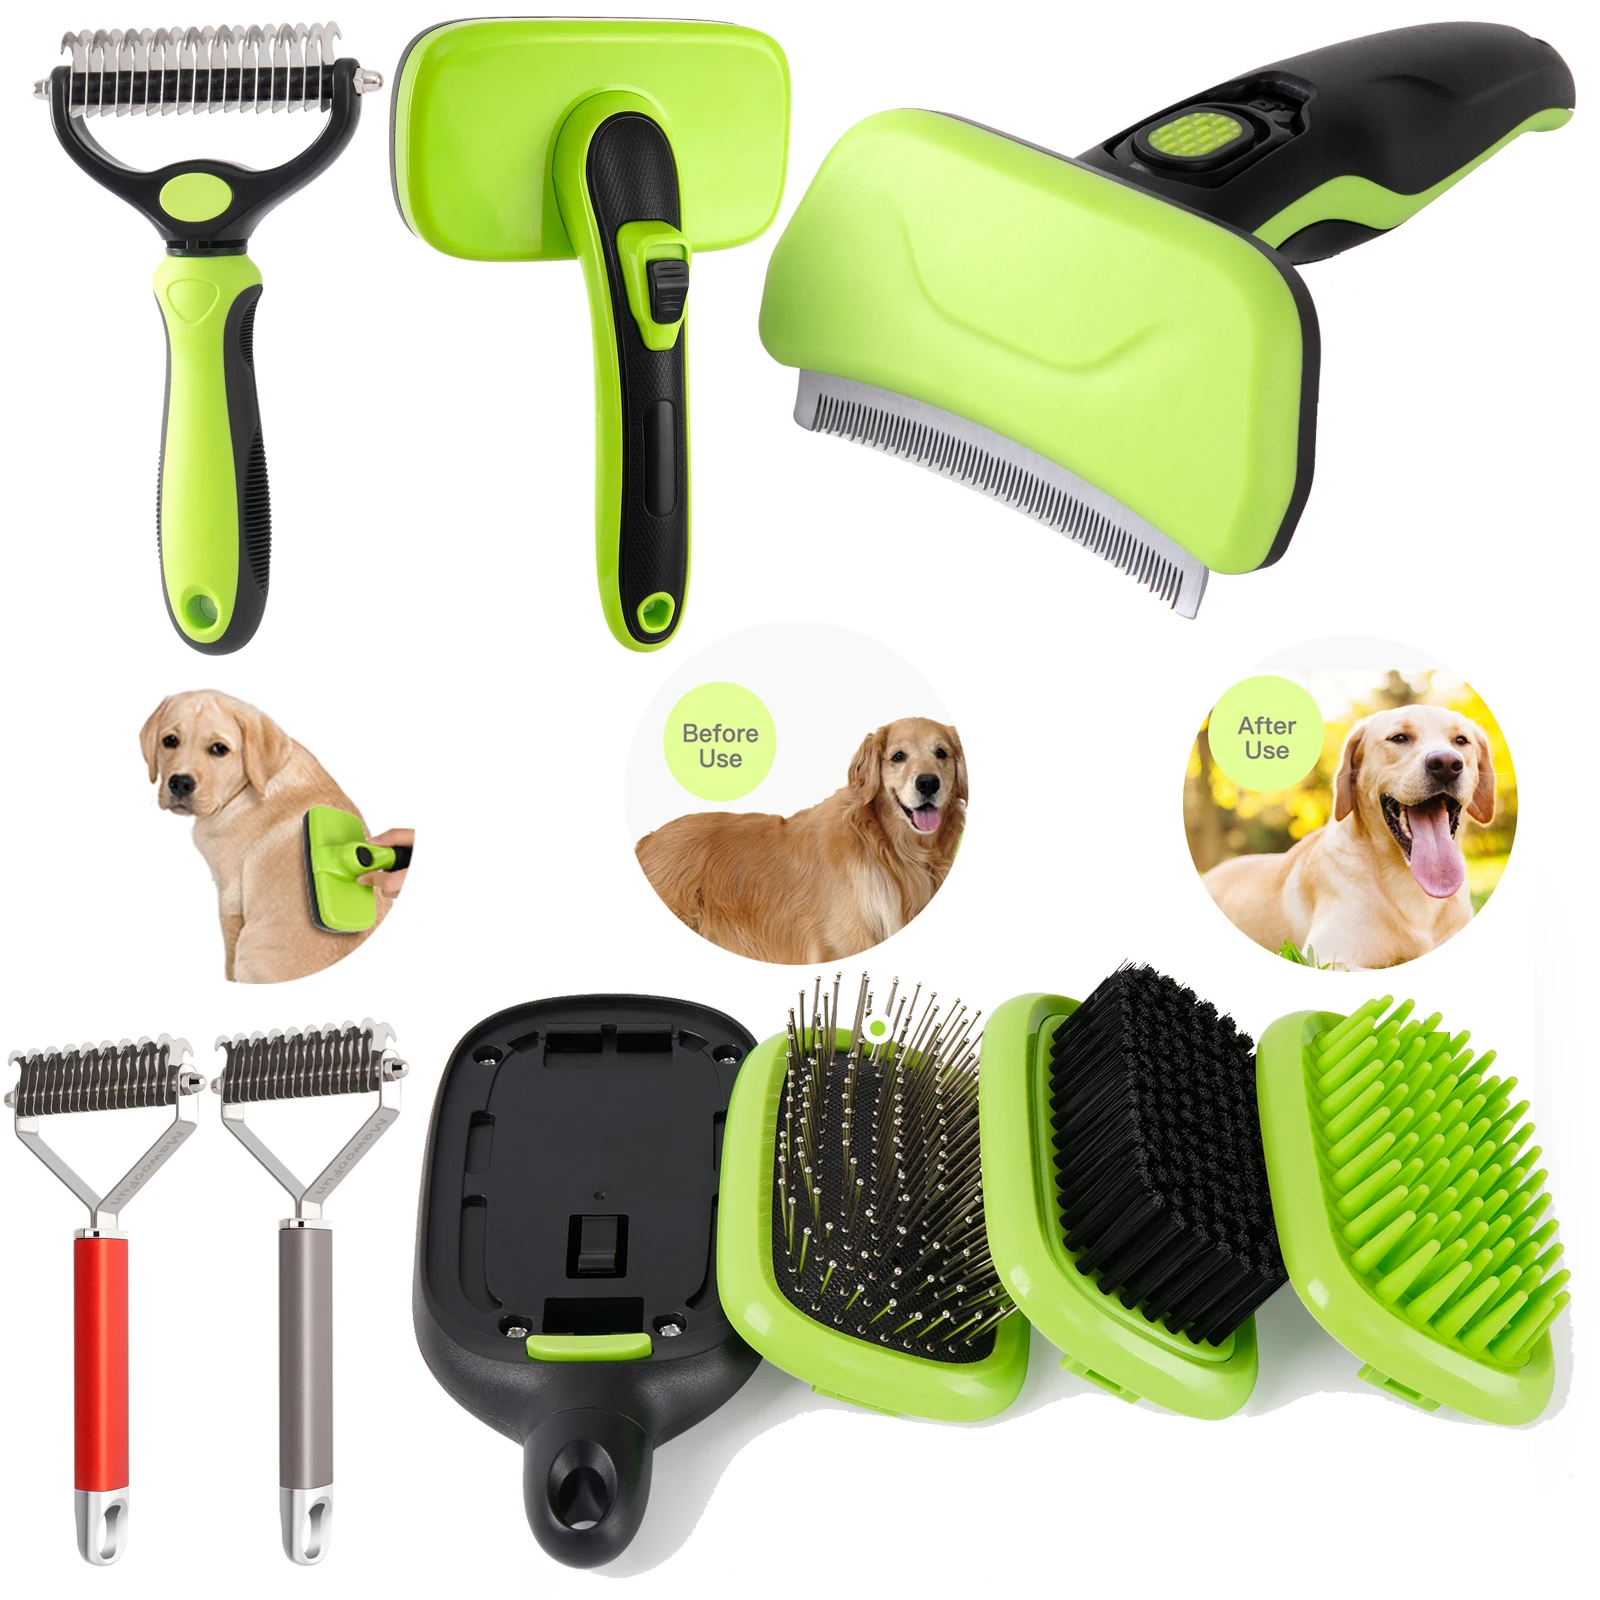 what is the best brush for long hair dogs